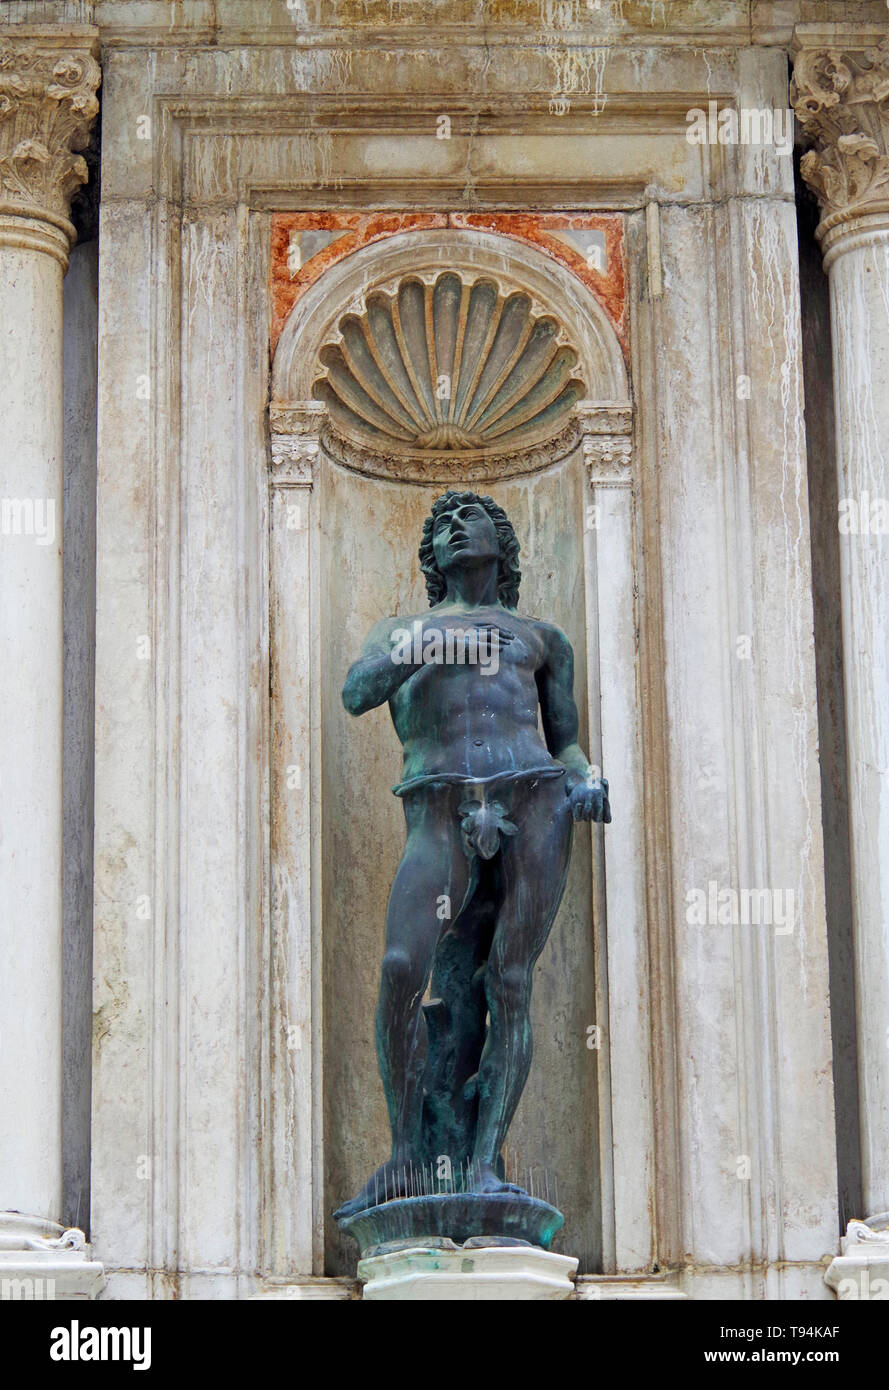 A bronze statue of a naked young man looking heavenward with his right hand on his heart, set in niche painted to give a tromp l’oeil effect Stock Photo